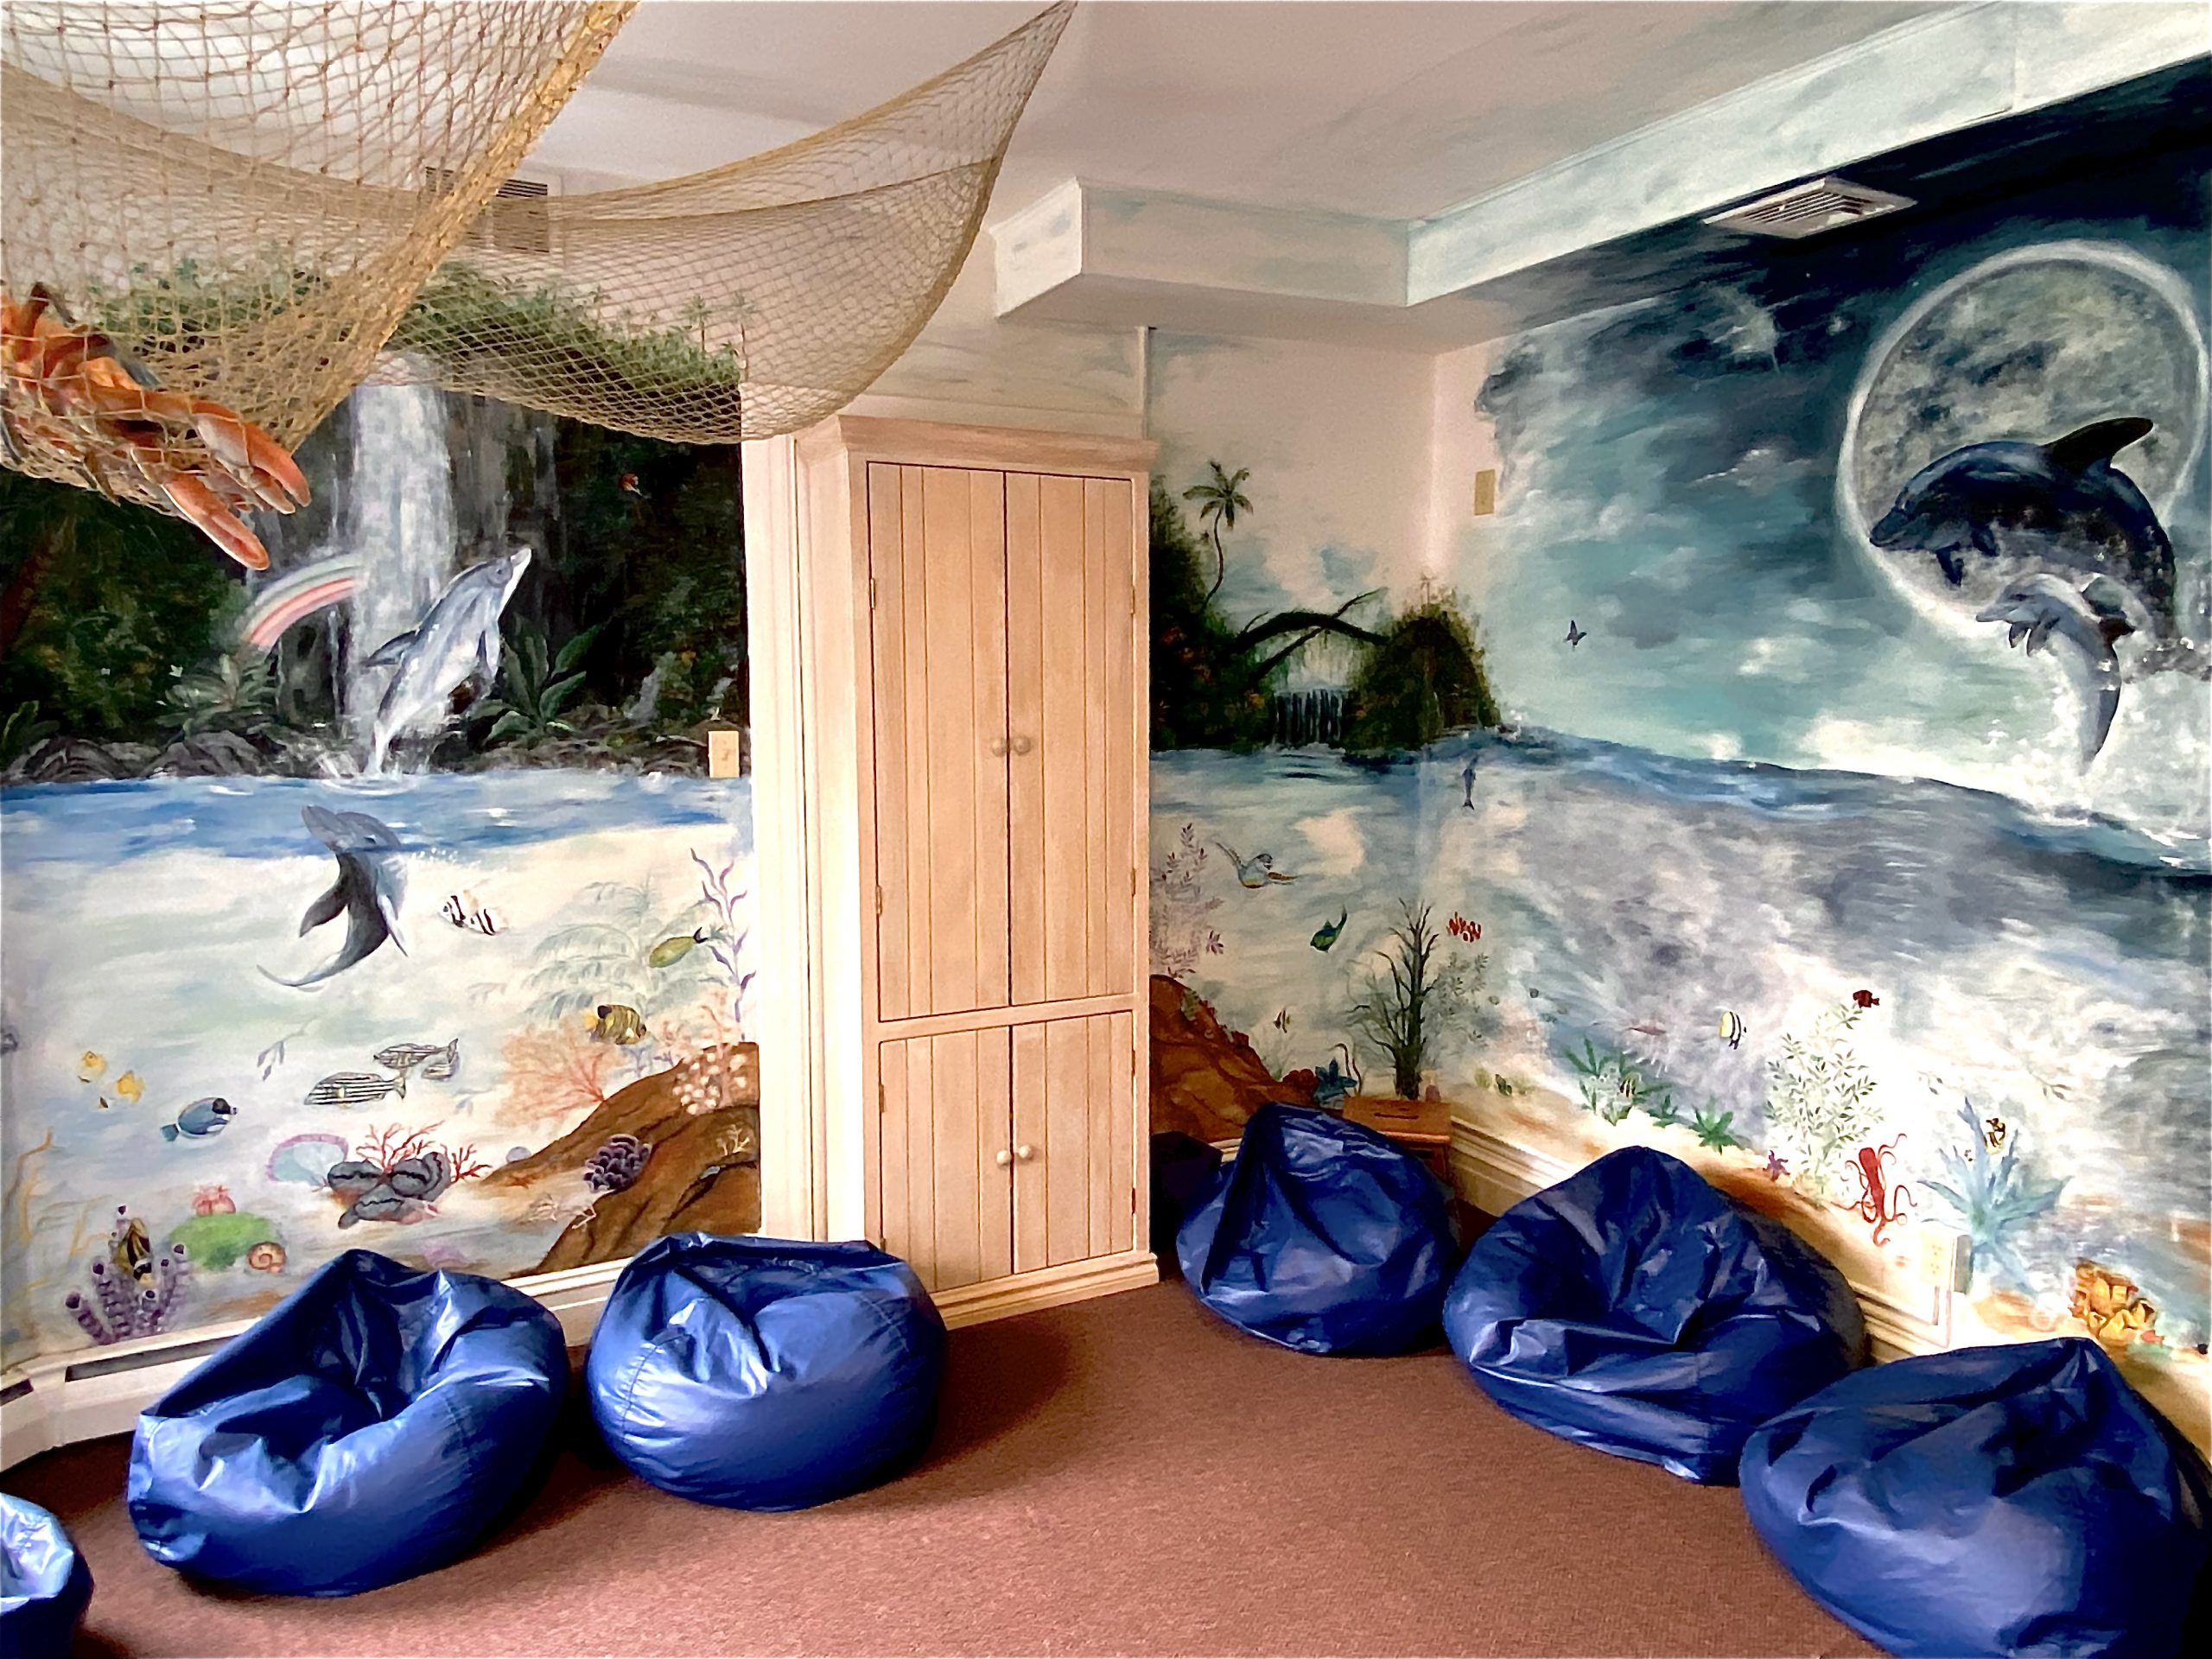 Middle school age children occupy the Dolphin Room, designed to support their need for peace and serenity amidst the chaos. The mural depicts the role a dolphin plays in rescuing a drowning person! The beautiful symbolism and deeper meaning serve this age group well.